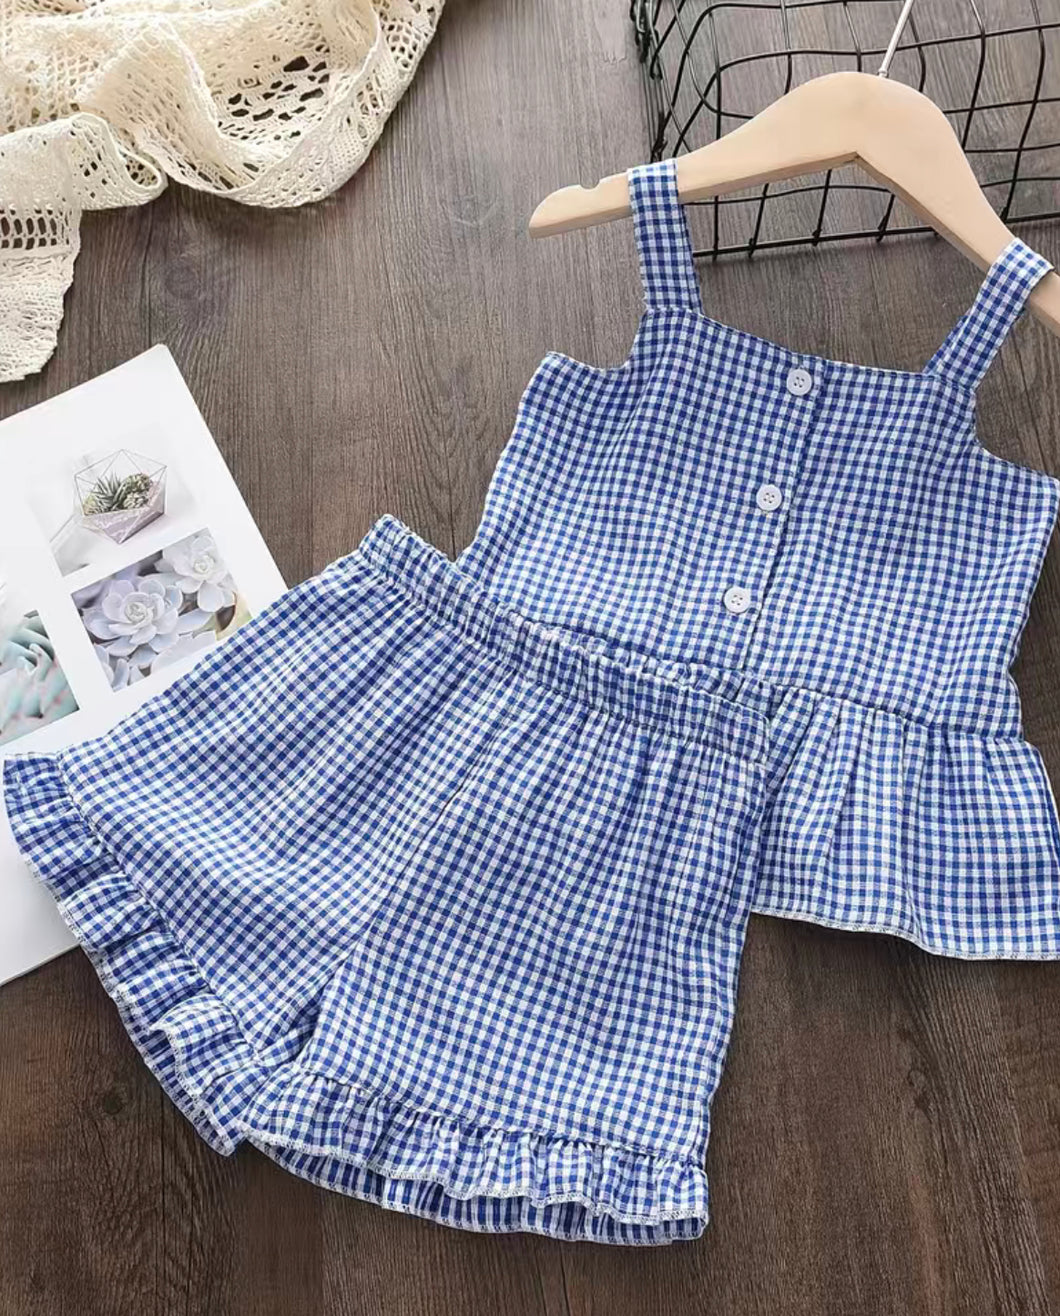 Blue Gingham Shorts Outfit